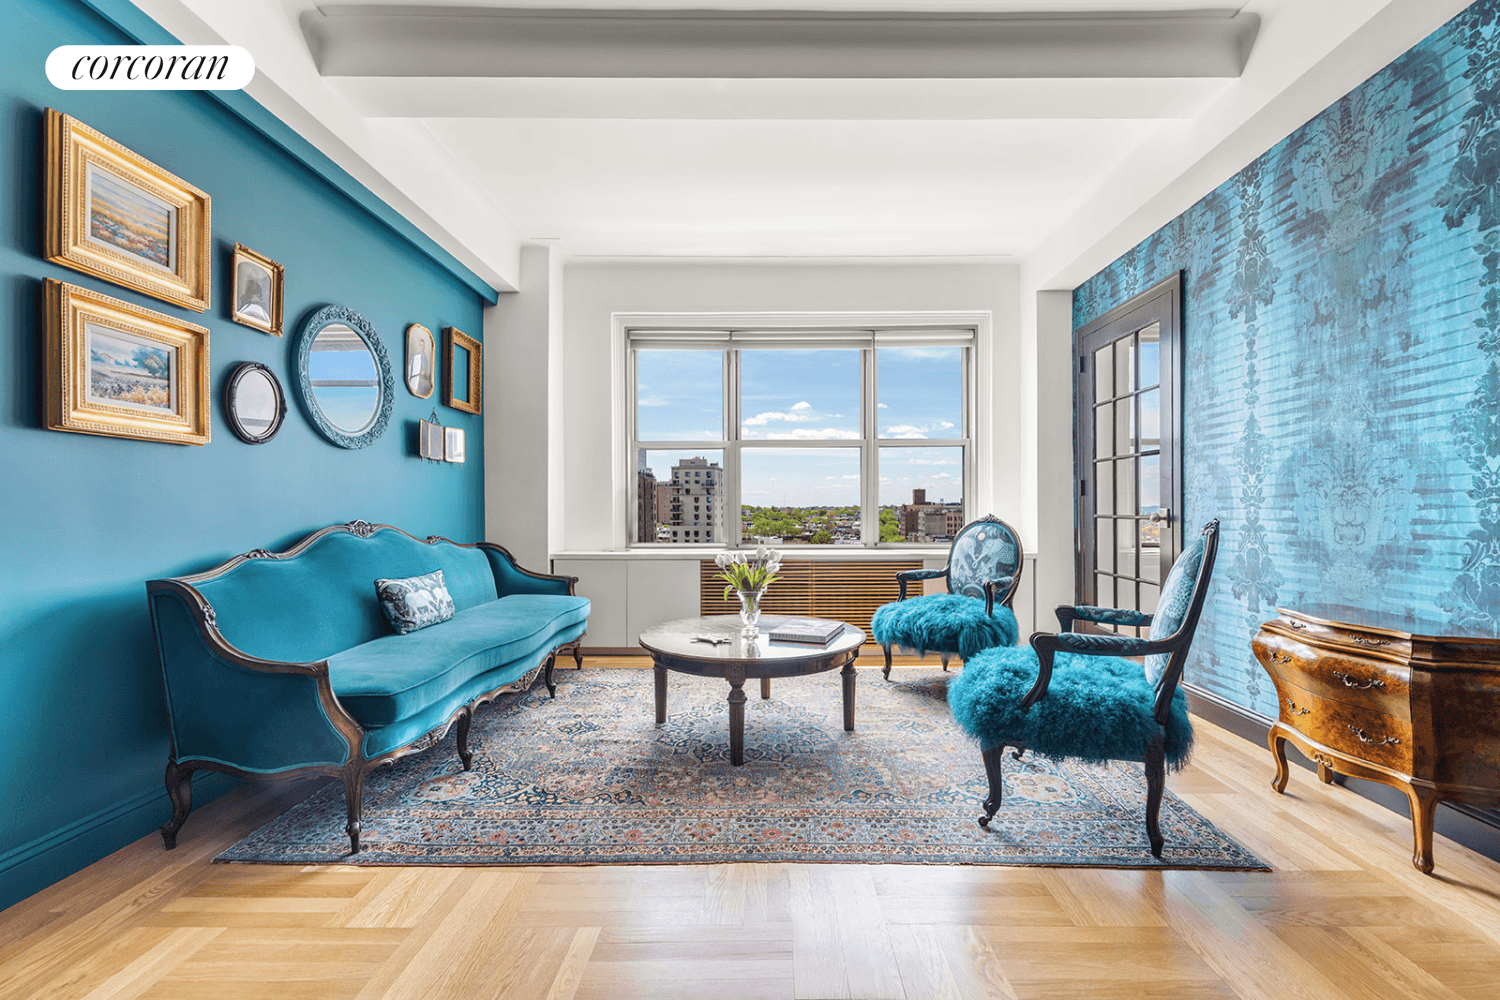 Striking and unique one bedroom apartment at 1 Plaza Street West in Park Slope, impeccably renovated to include a chic, funky, vivid hued Modern Victorian design to celebrate the 1920s ...